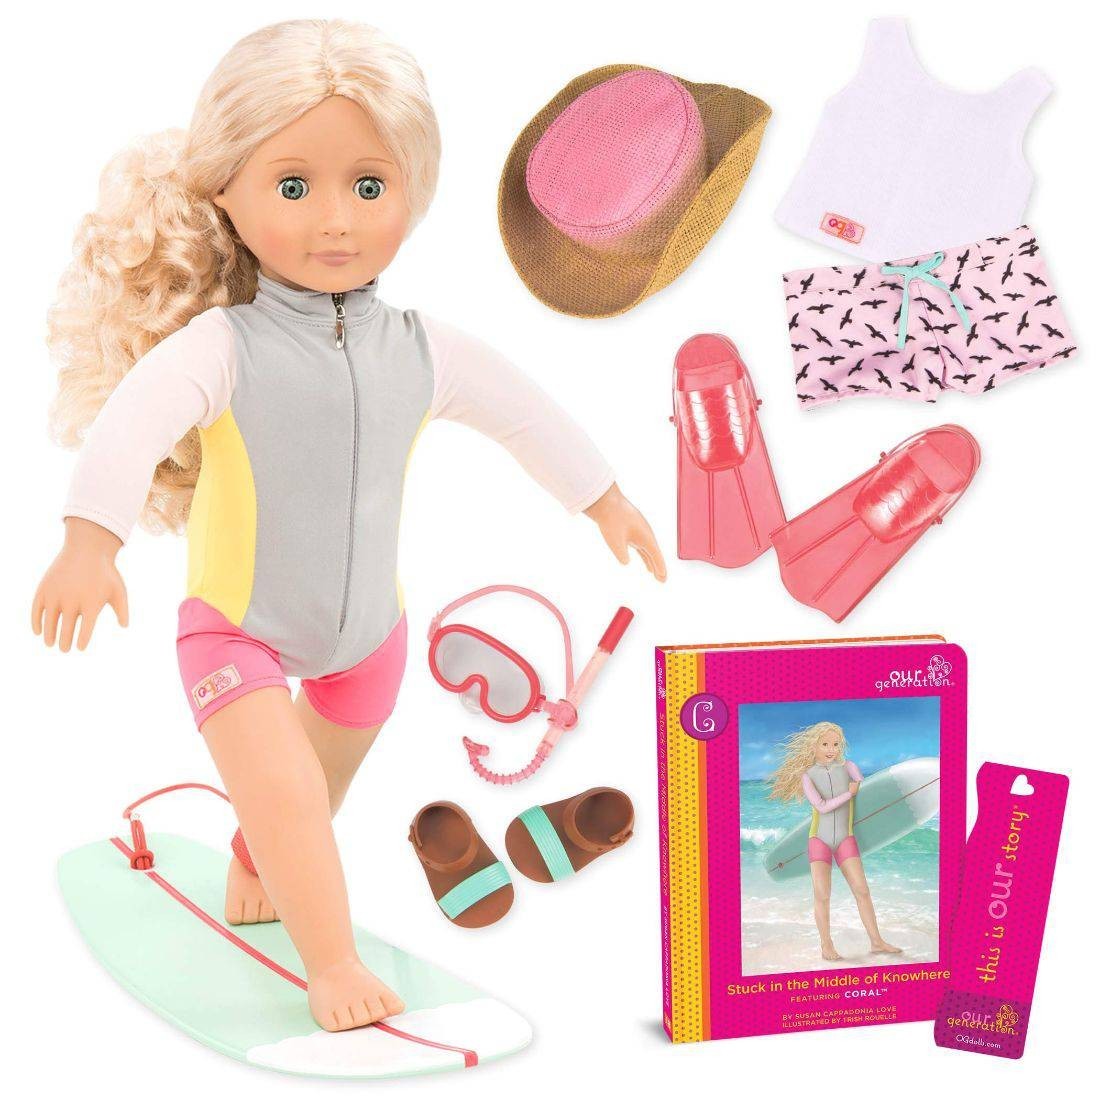 https://theoutfit.me/62986-thickbox_default/our-generation-coral-surfer-doll.jpg